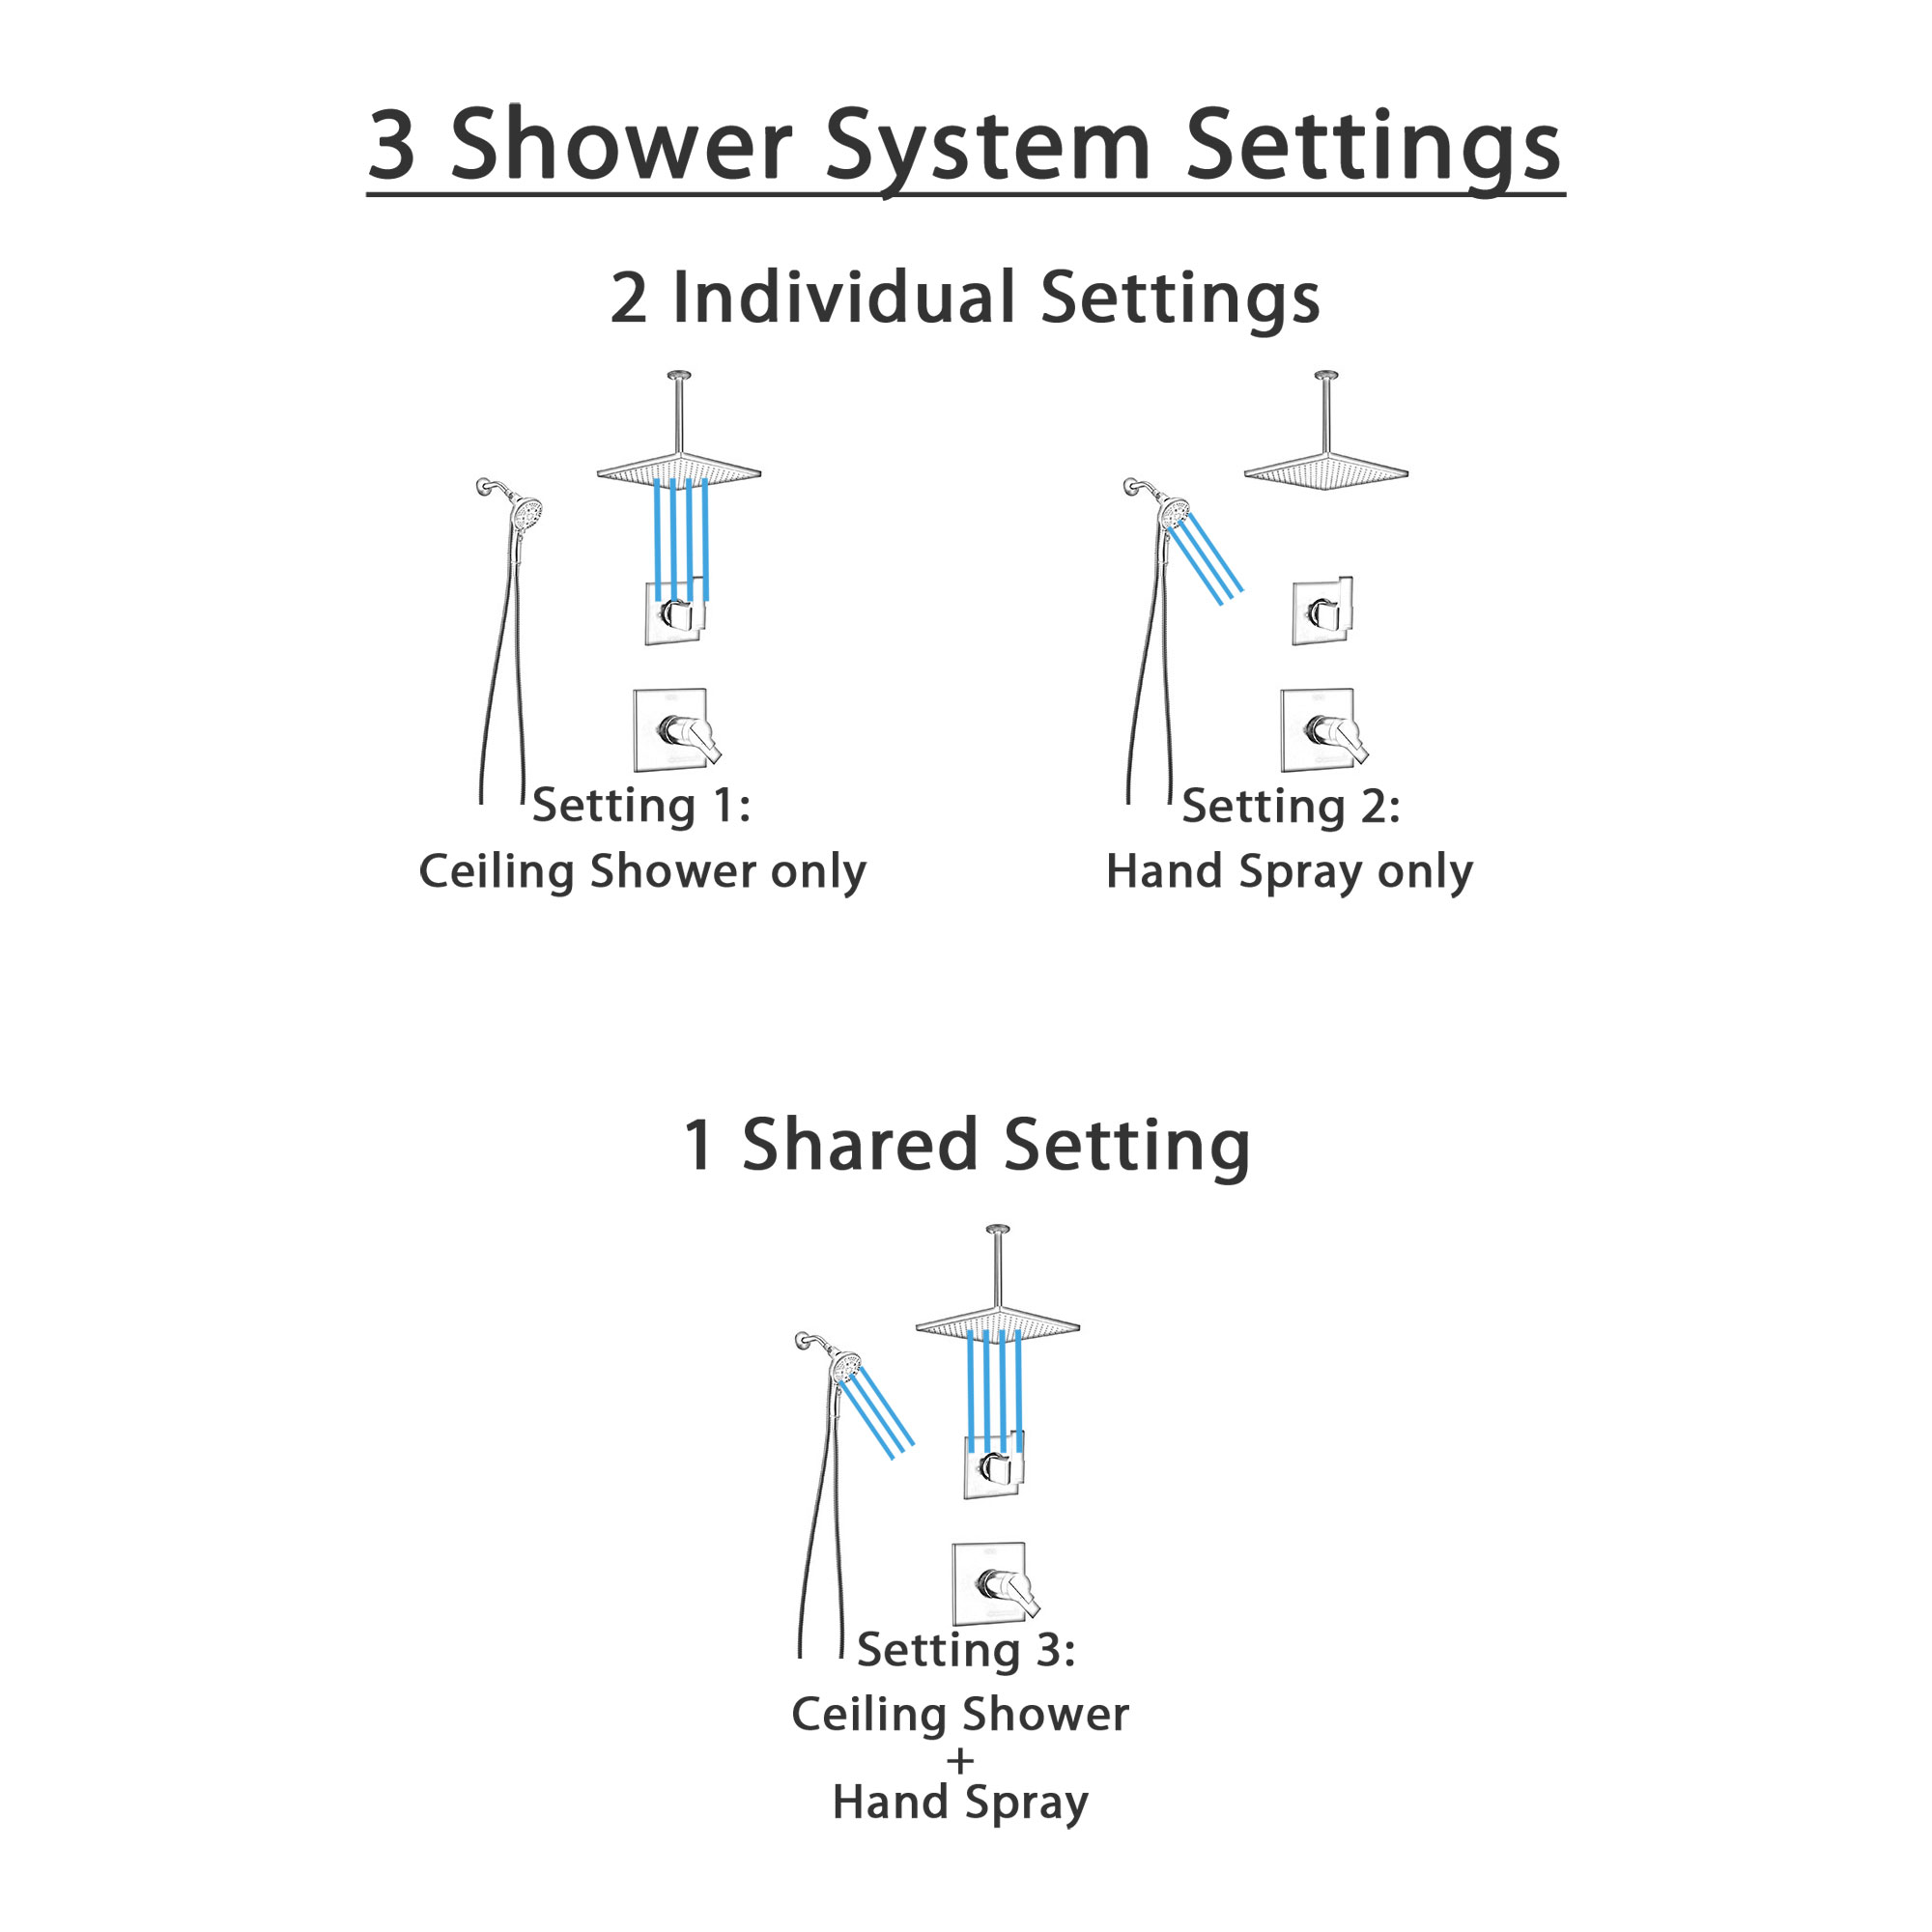 Delta Ara Matte Black Modern Square Thermostatic Shower System with Large Rain Ceiling Showerhead and SureDock Detachable Hand Spray SS17T673BL8